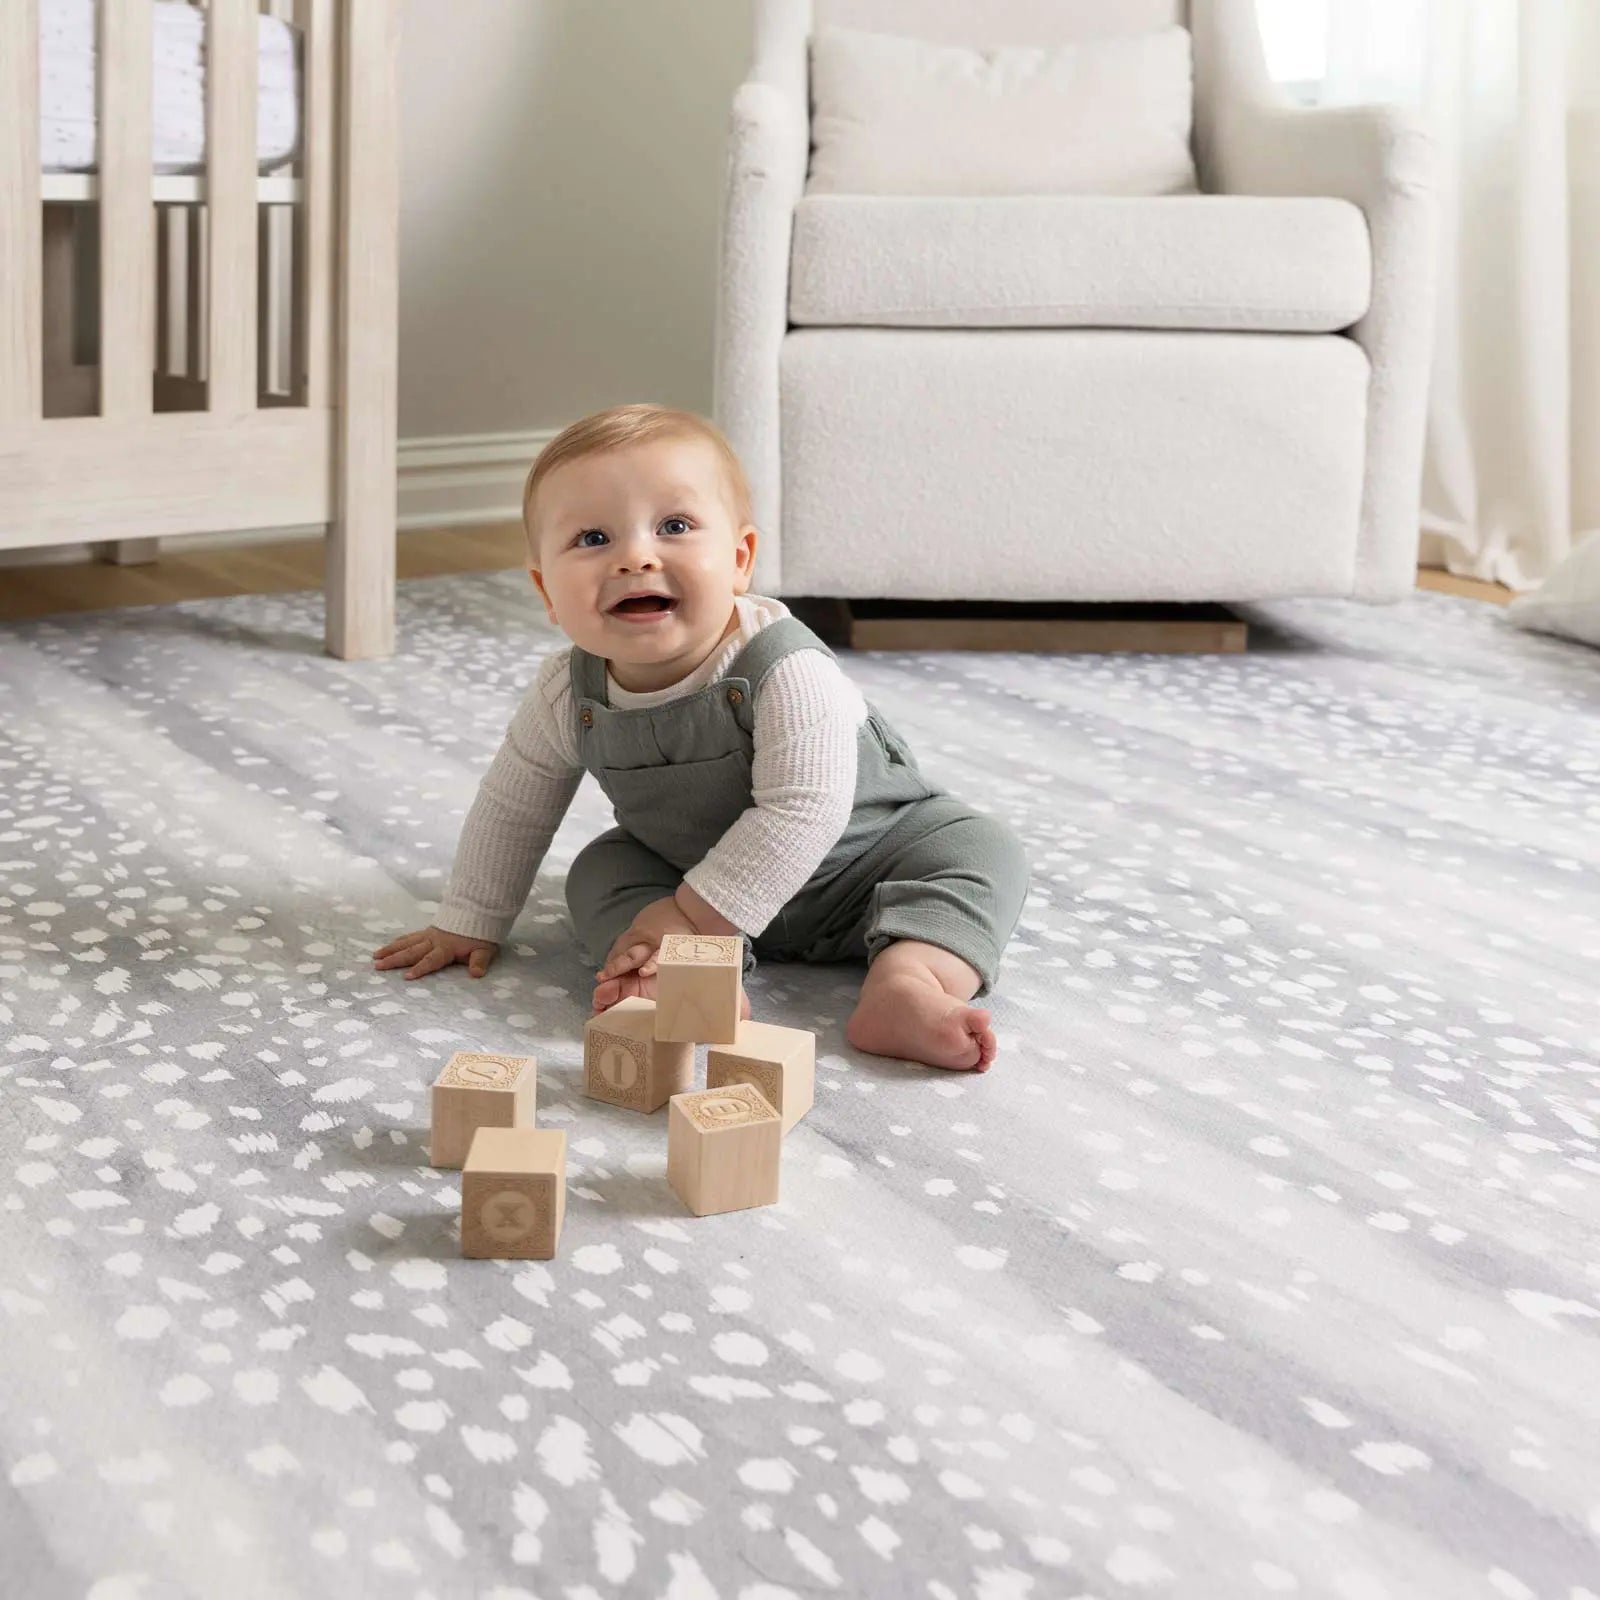 Fawn silver gray animal print play mat with baby playing with wooden blocks